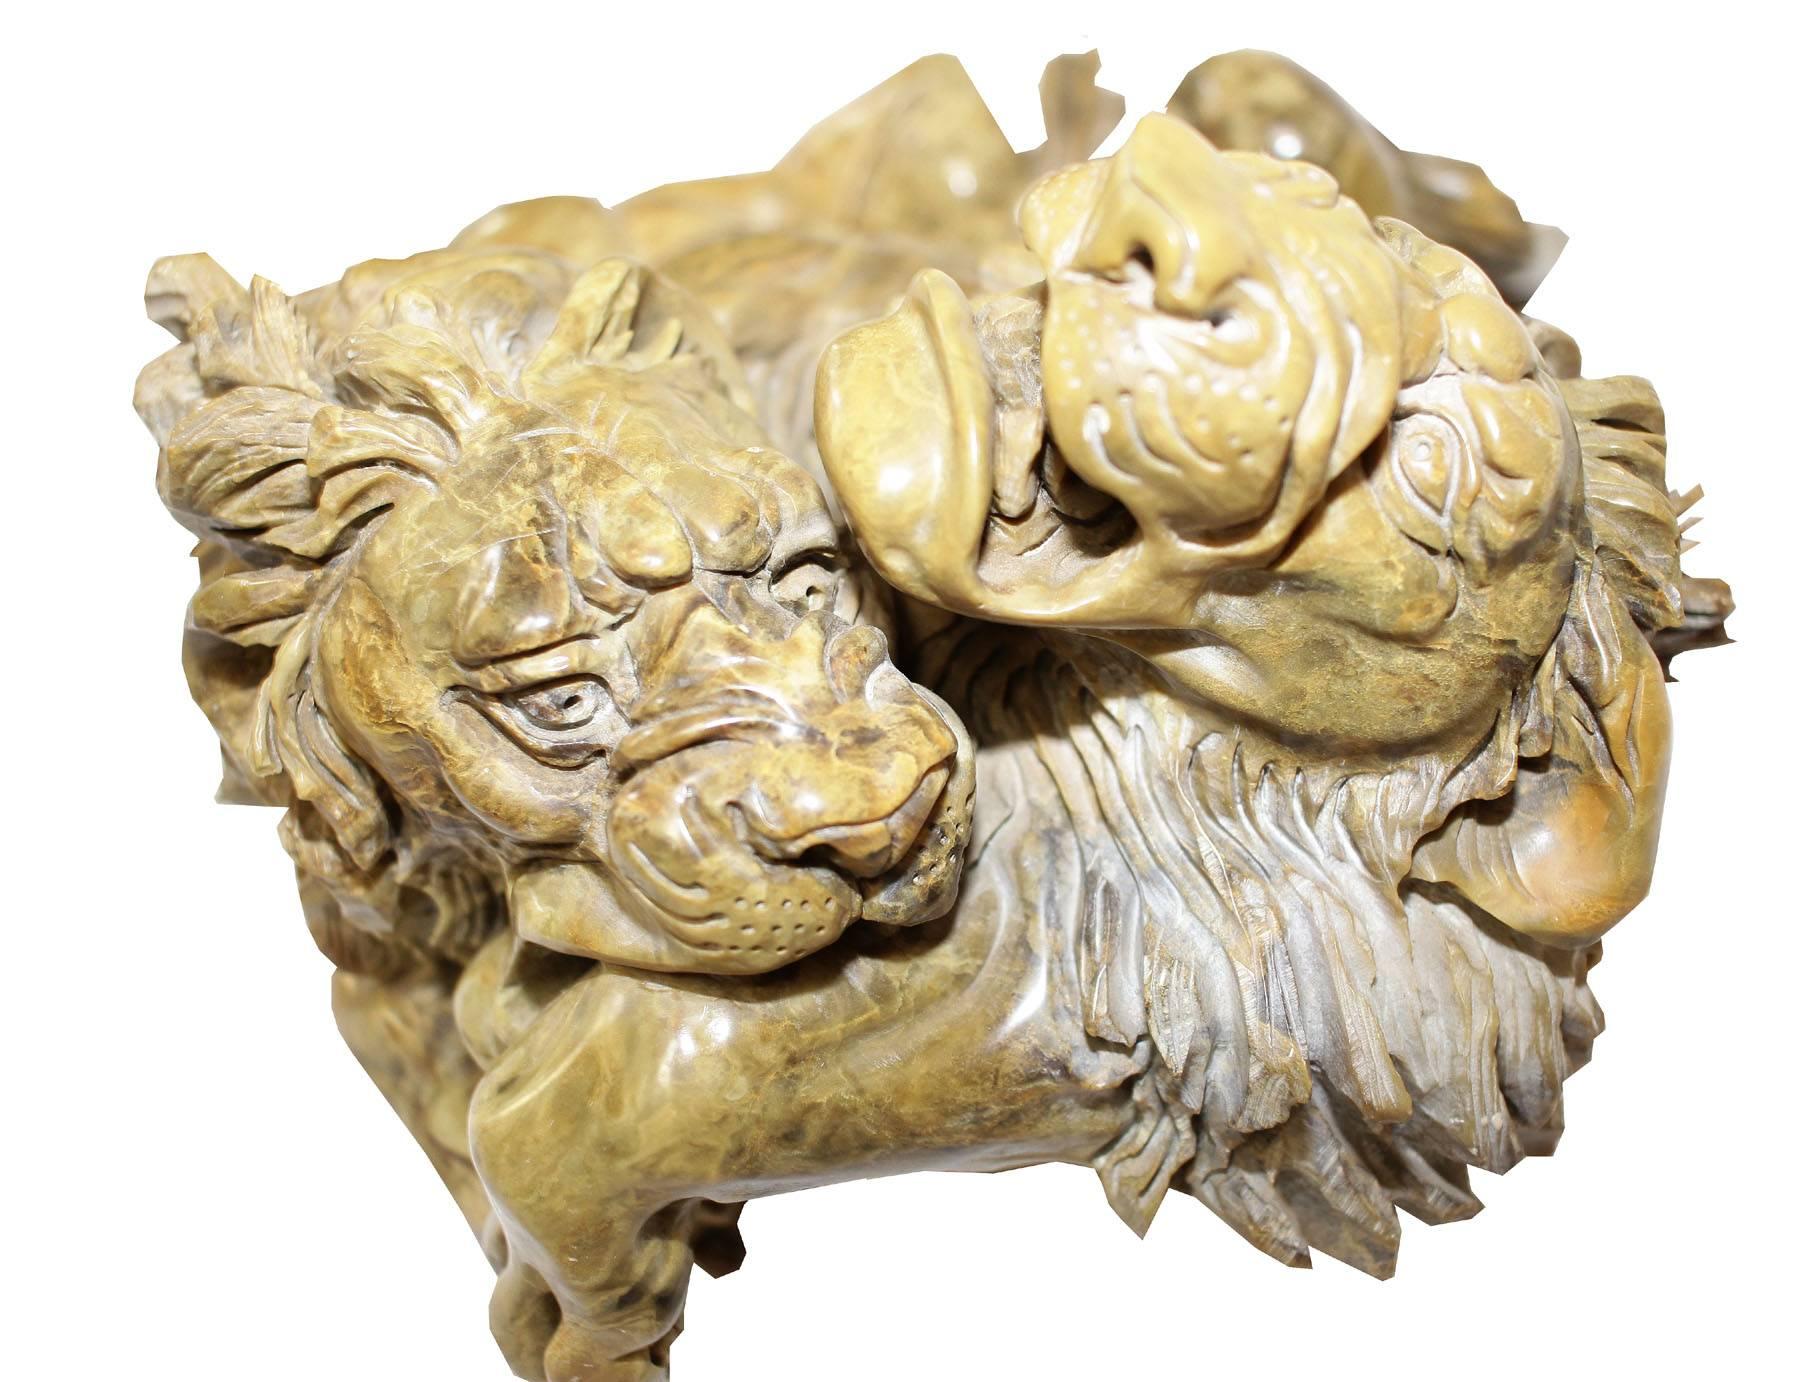 Amazing and dramatic battle of two male lions carved in butter jade. The item is a heavy piece beautiful from every angle. Signed L. Khoza date 6.6.25.
The piece has an amazing presents an amazing conversation piece.